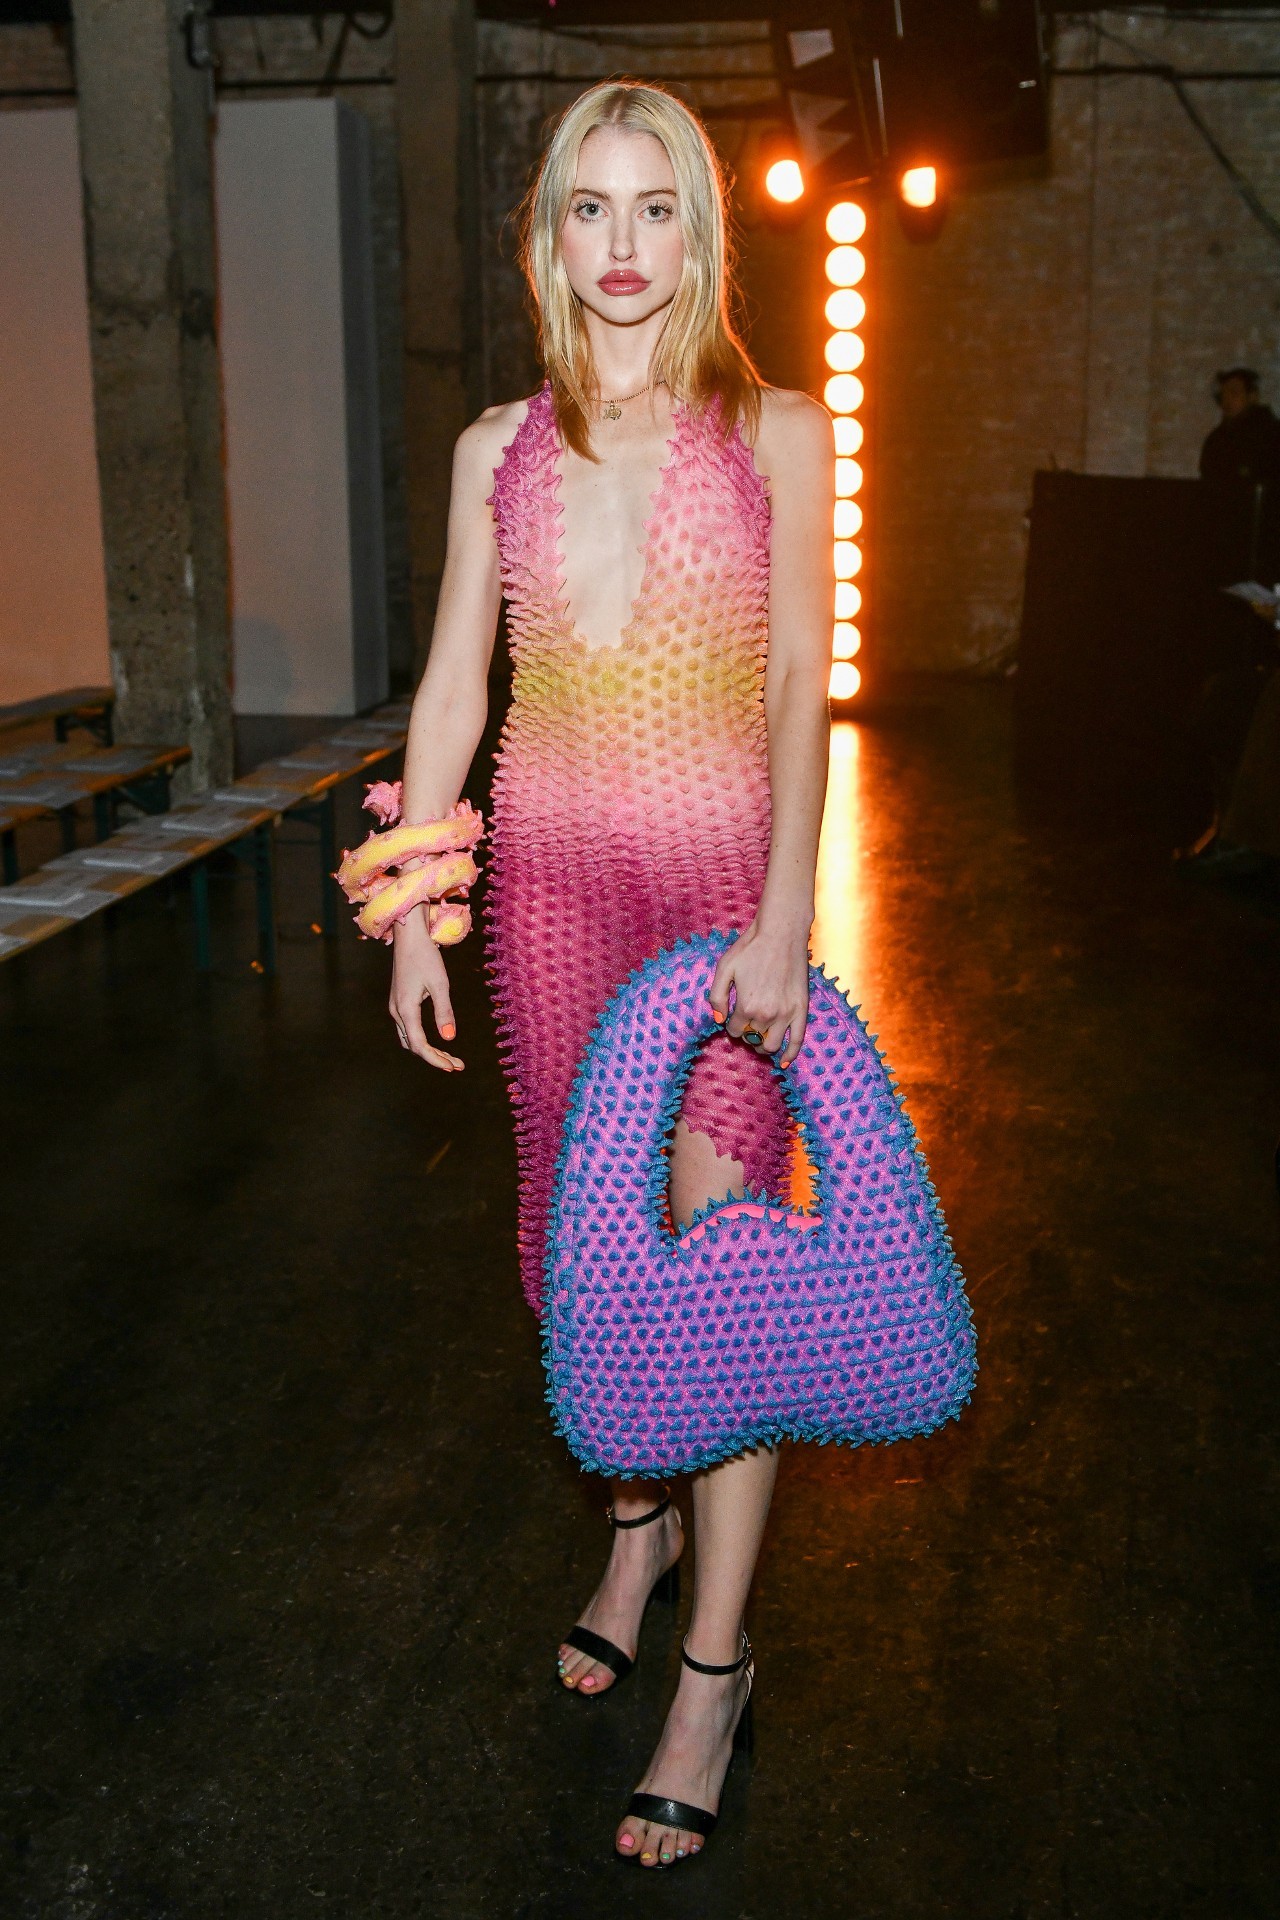 Chloe Cherry Euphoria Faye Actor Outfits Style David Koma FW22 show London Fashion Week Dress Floral Mini Black Chet Lo Bag Pink Ombre Ashley Williams Red Heart Bag 